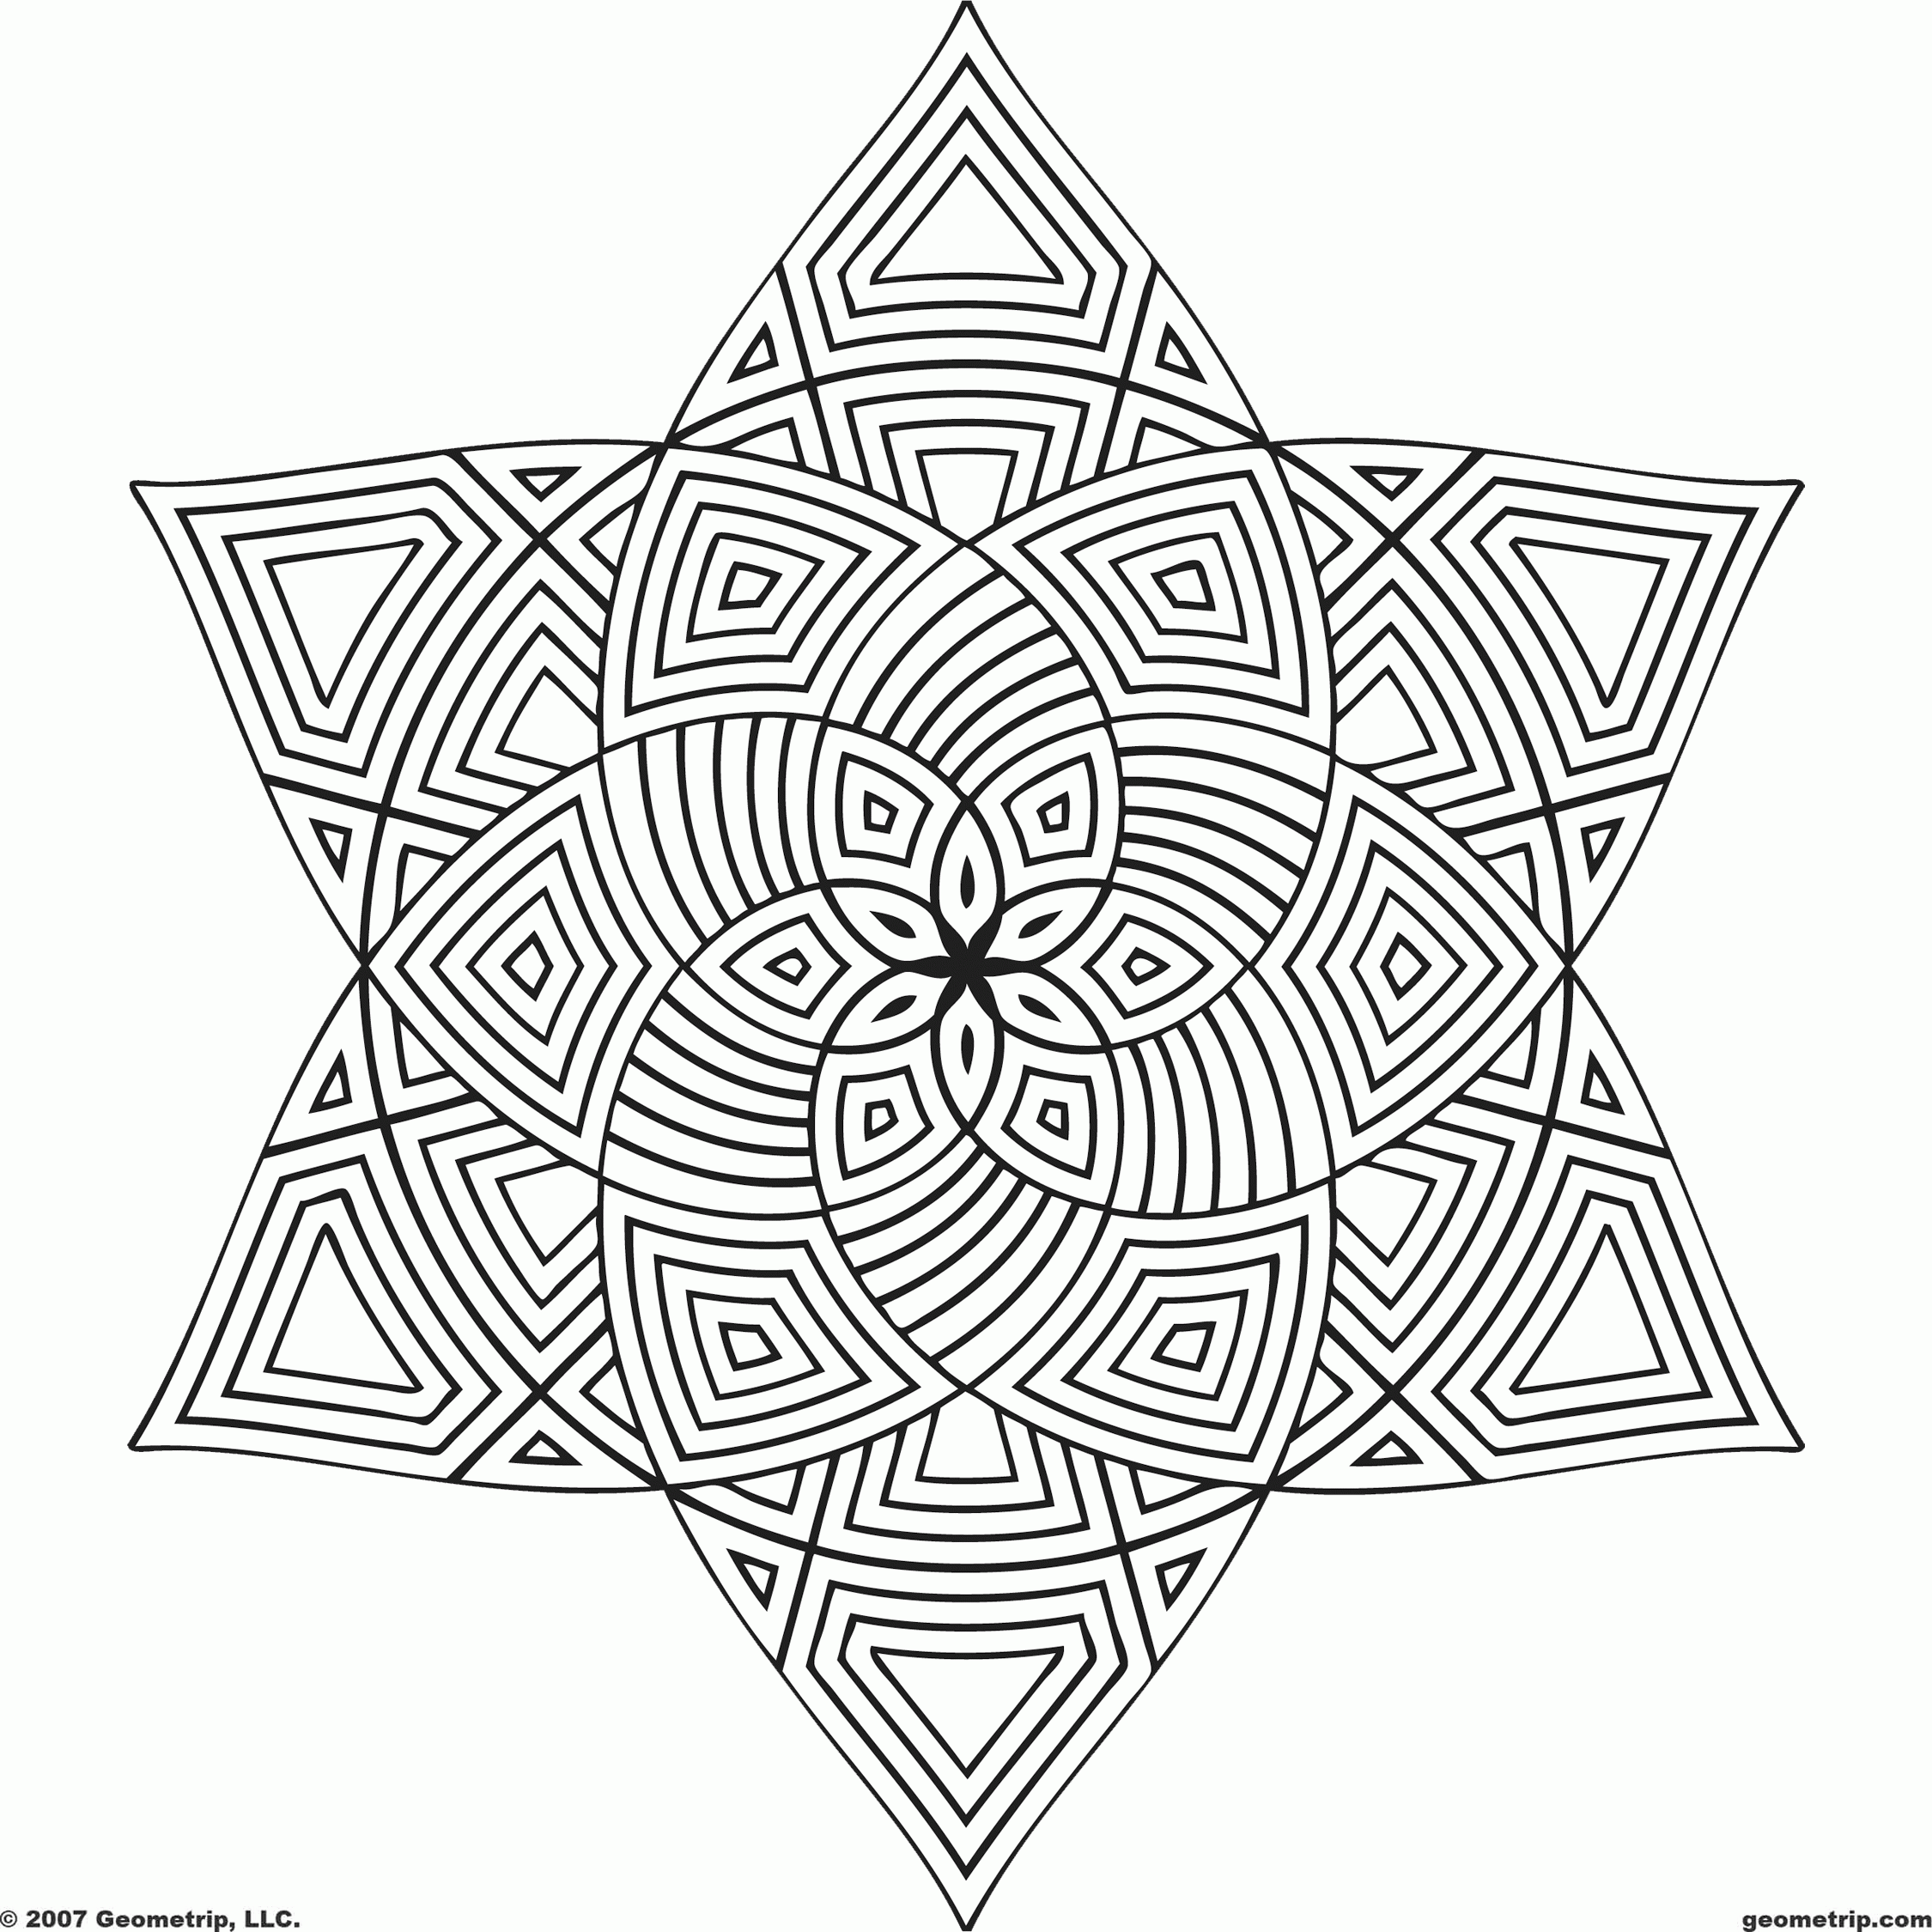 Pattern Coloring Pages - Widetheme